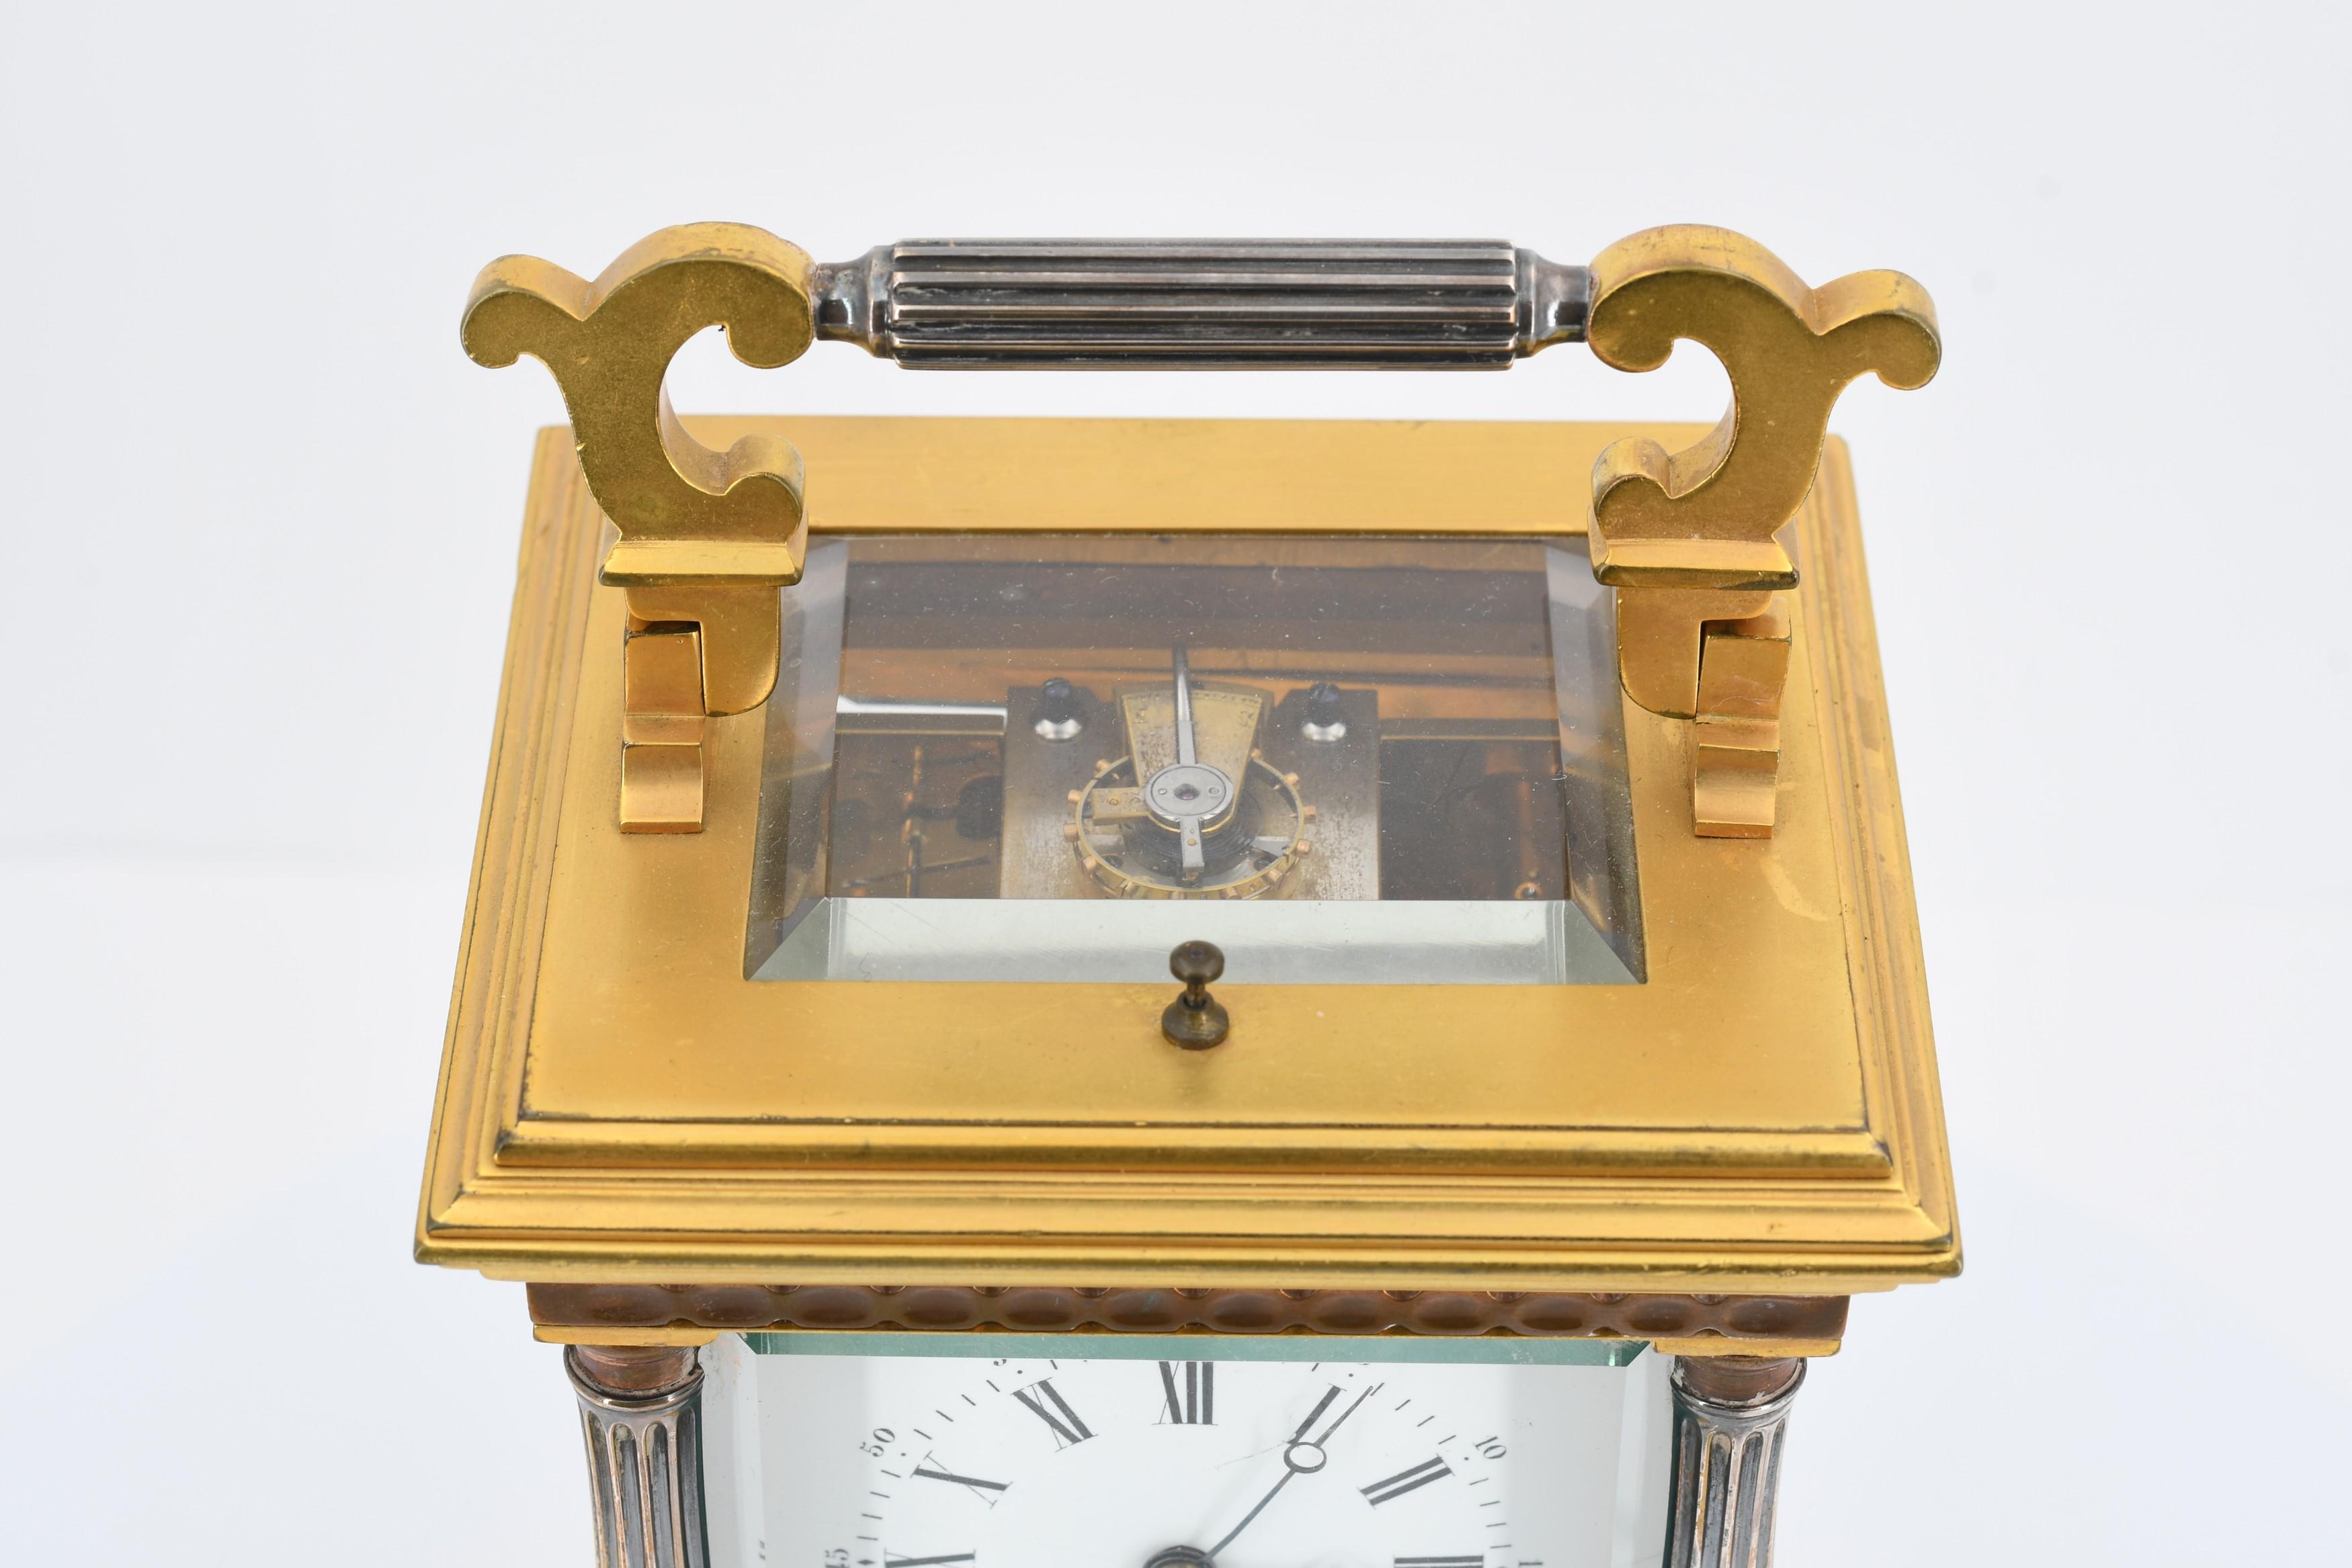 Carriage clock - Image 6 of 6